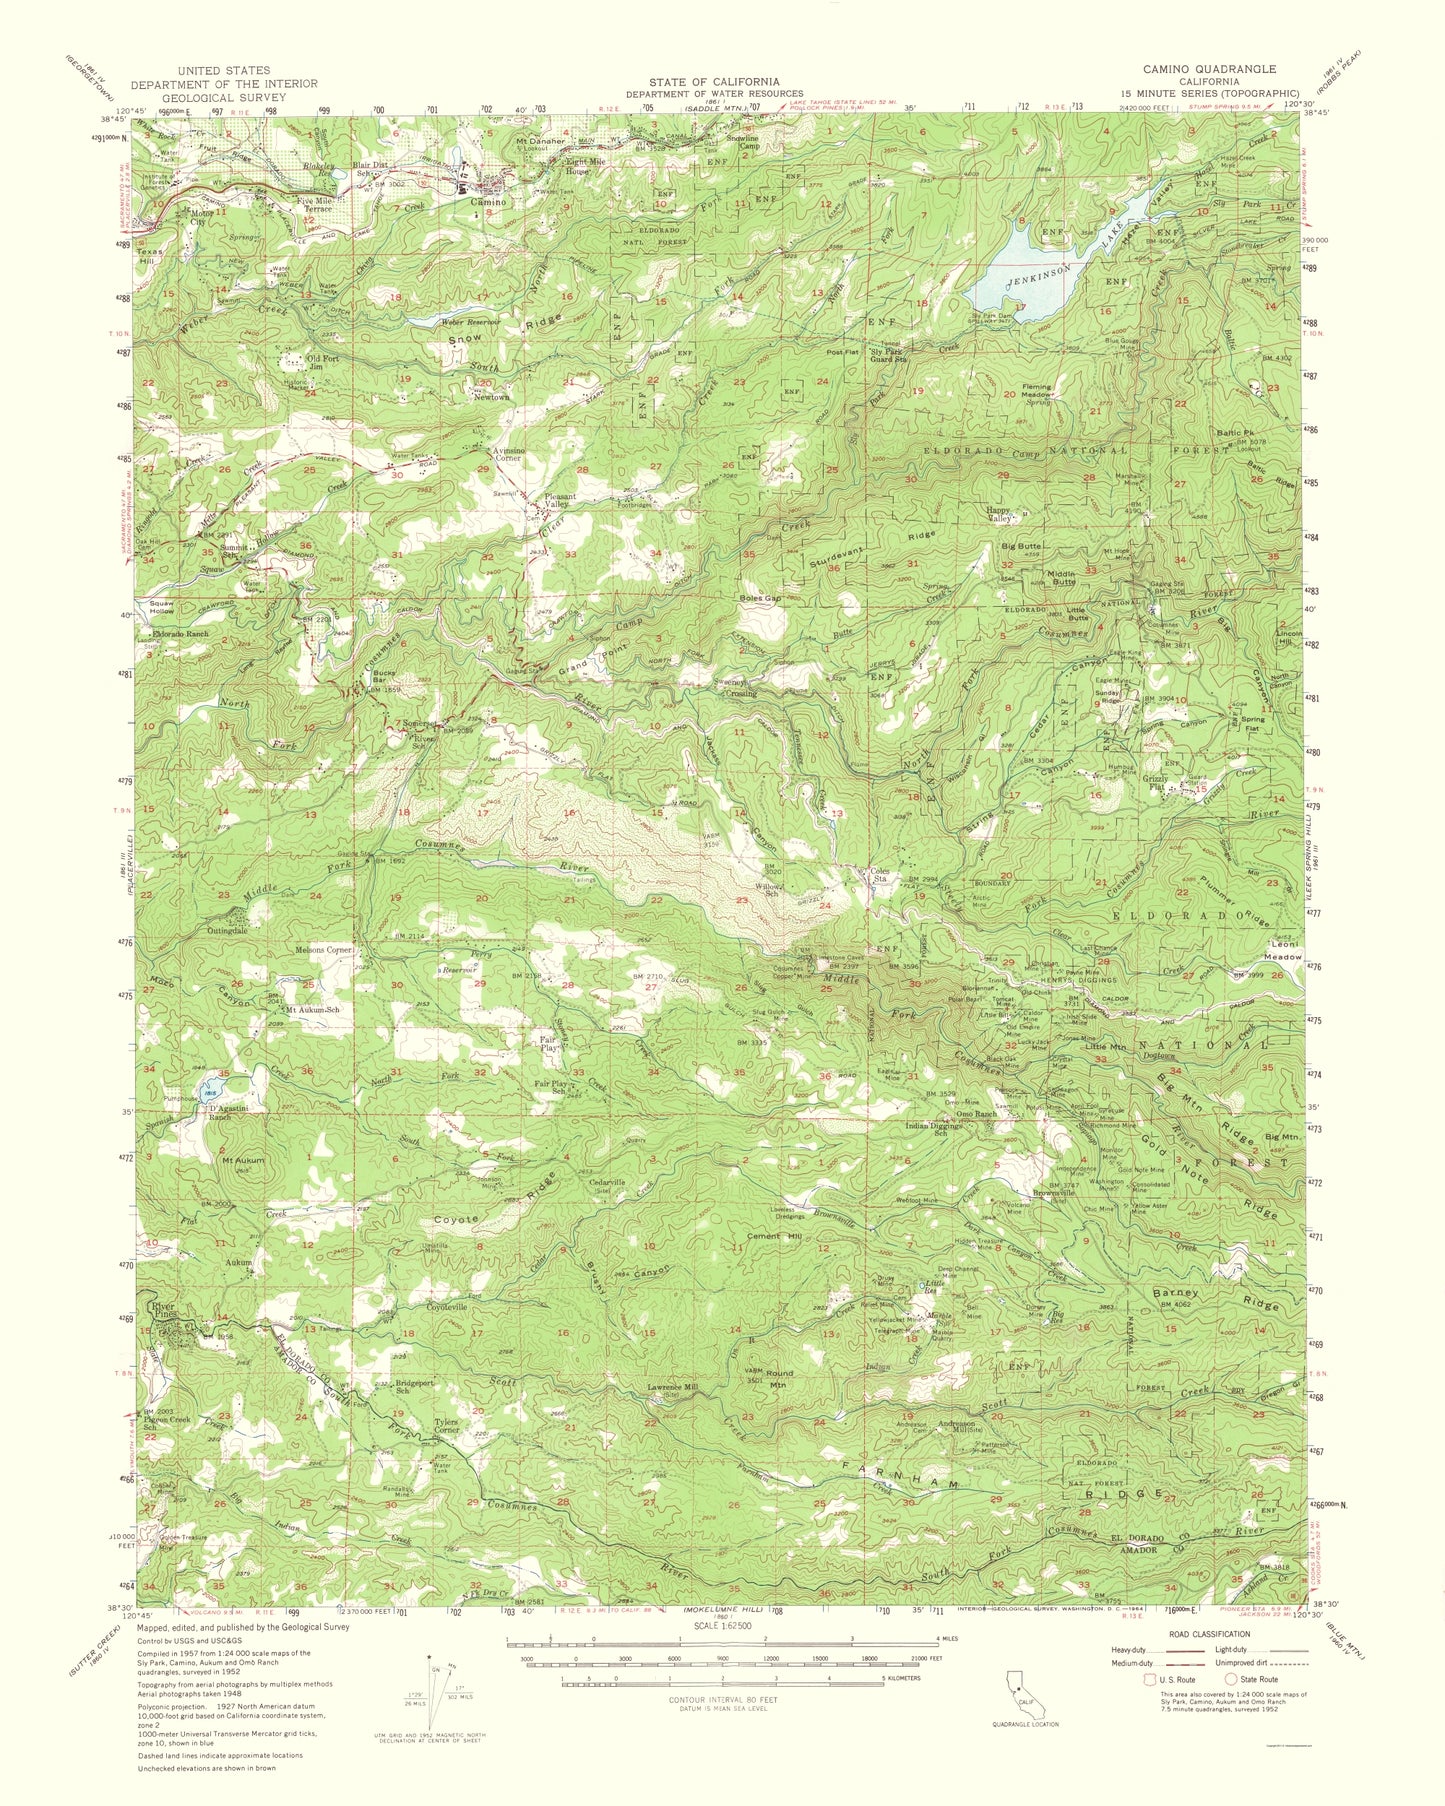 Topographical Map - Camino California Quad - USGS 1964 - 23 x 28.75 - Vintage Wall Art